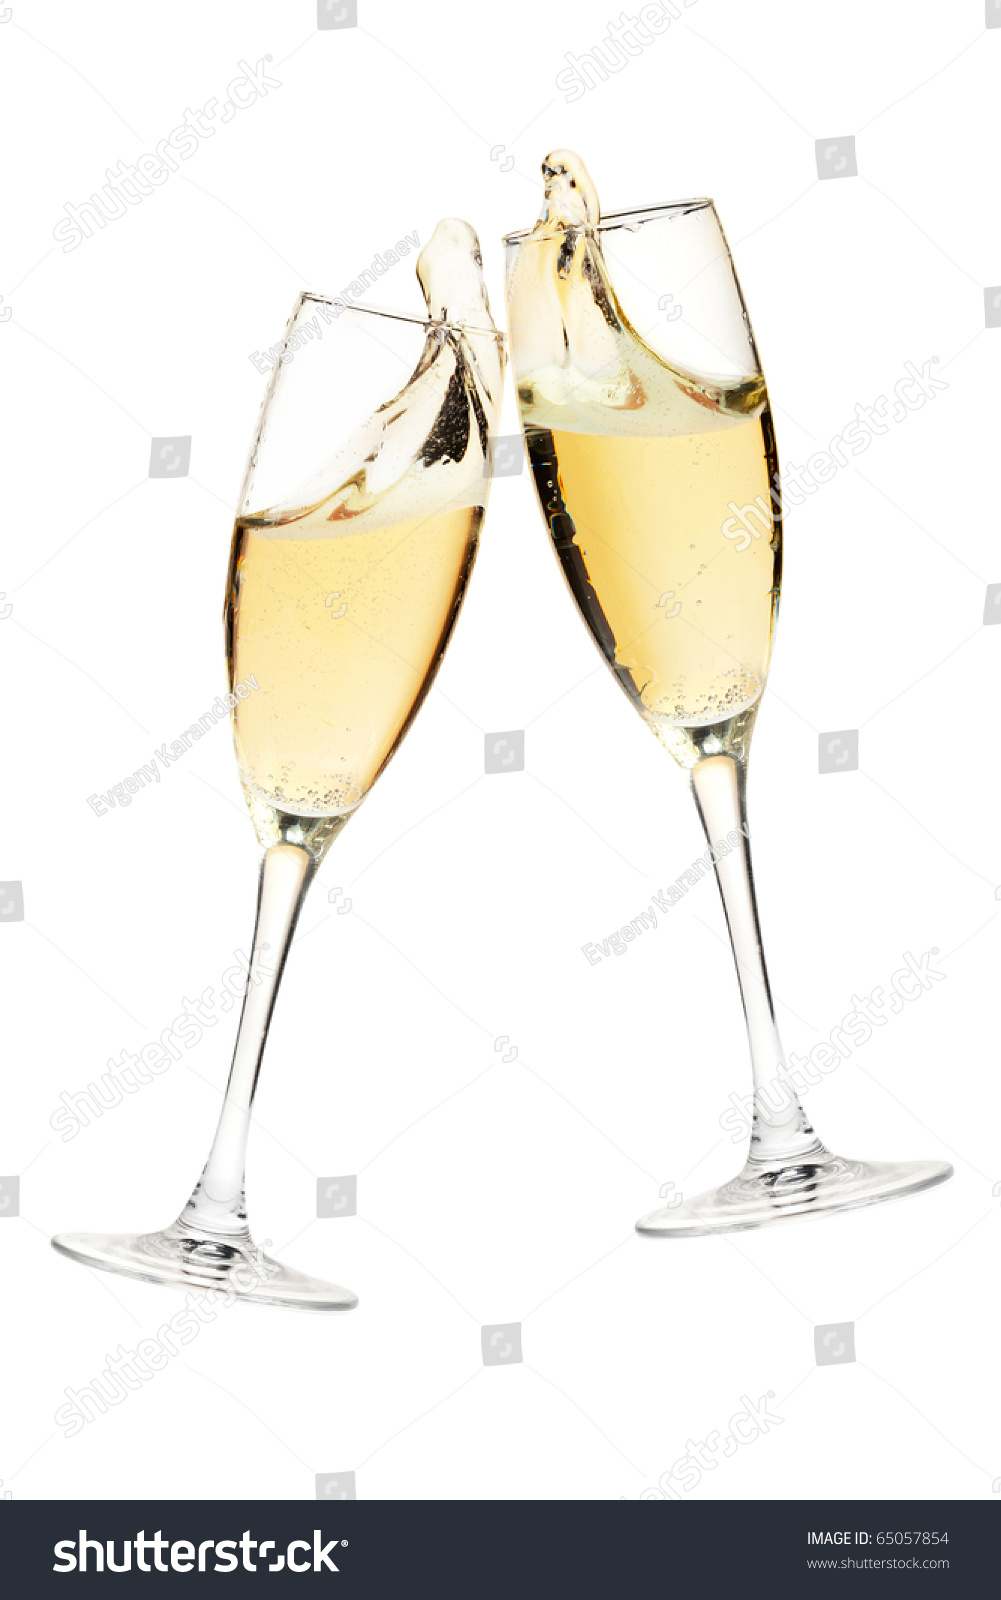 http://image.shutterstock.com/z/stock-photo-cheers-two-champagne-glasses-isolated-on-white-65057854.jpg